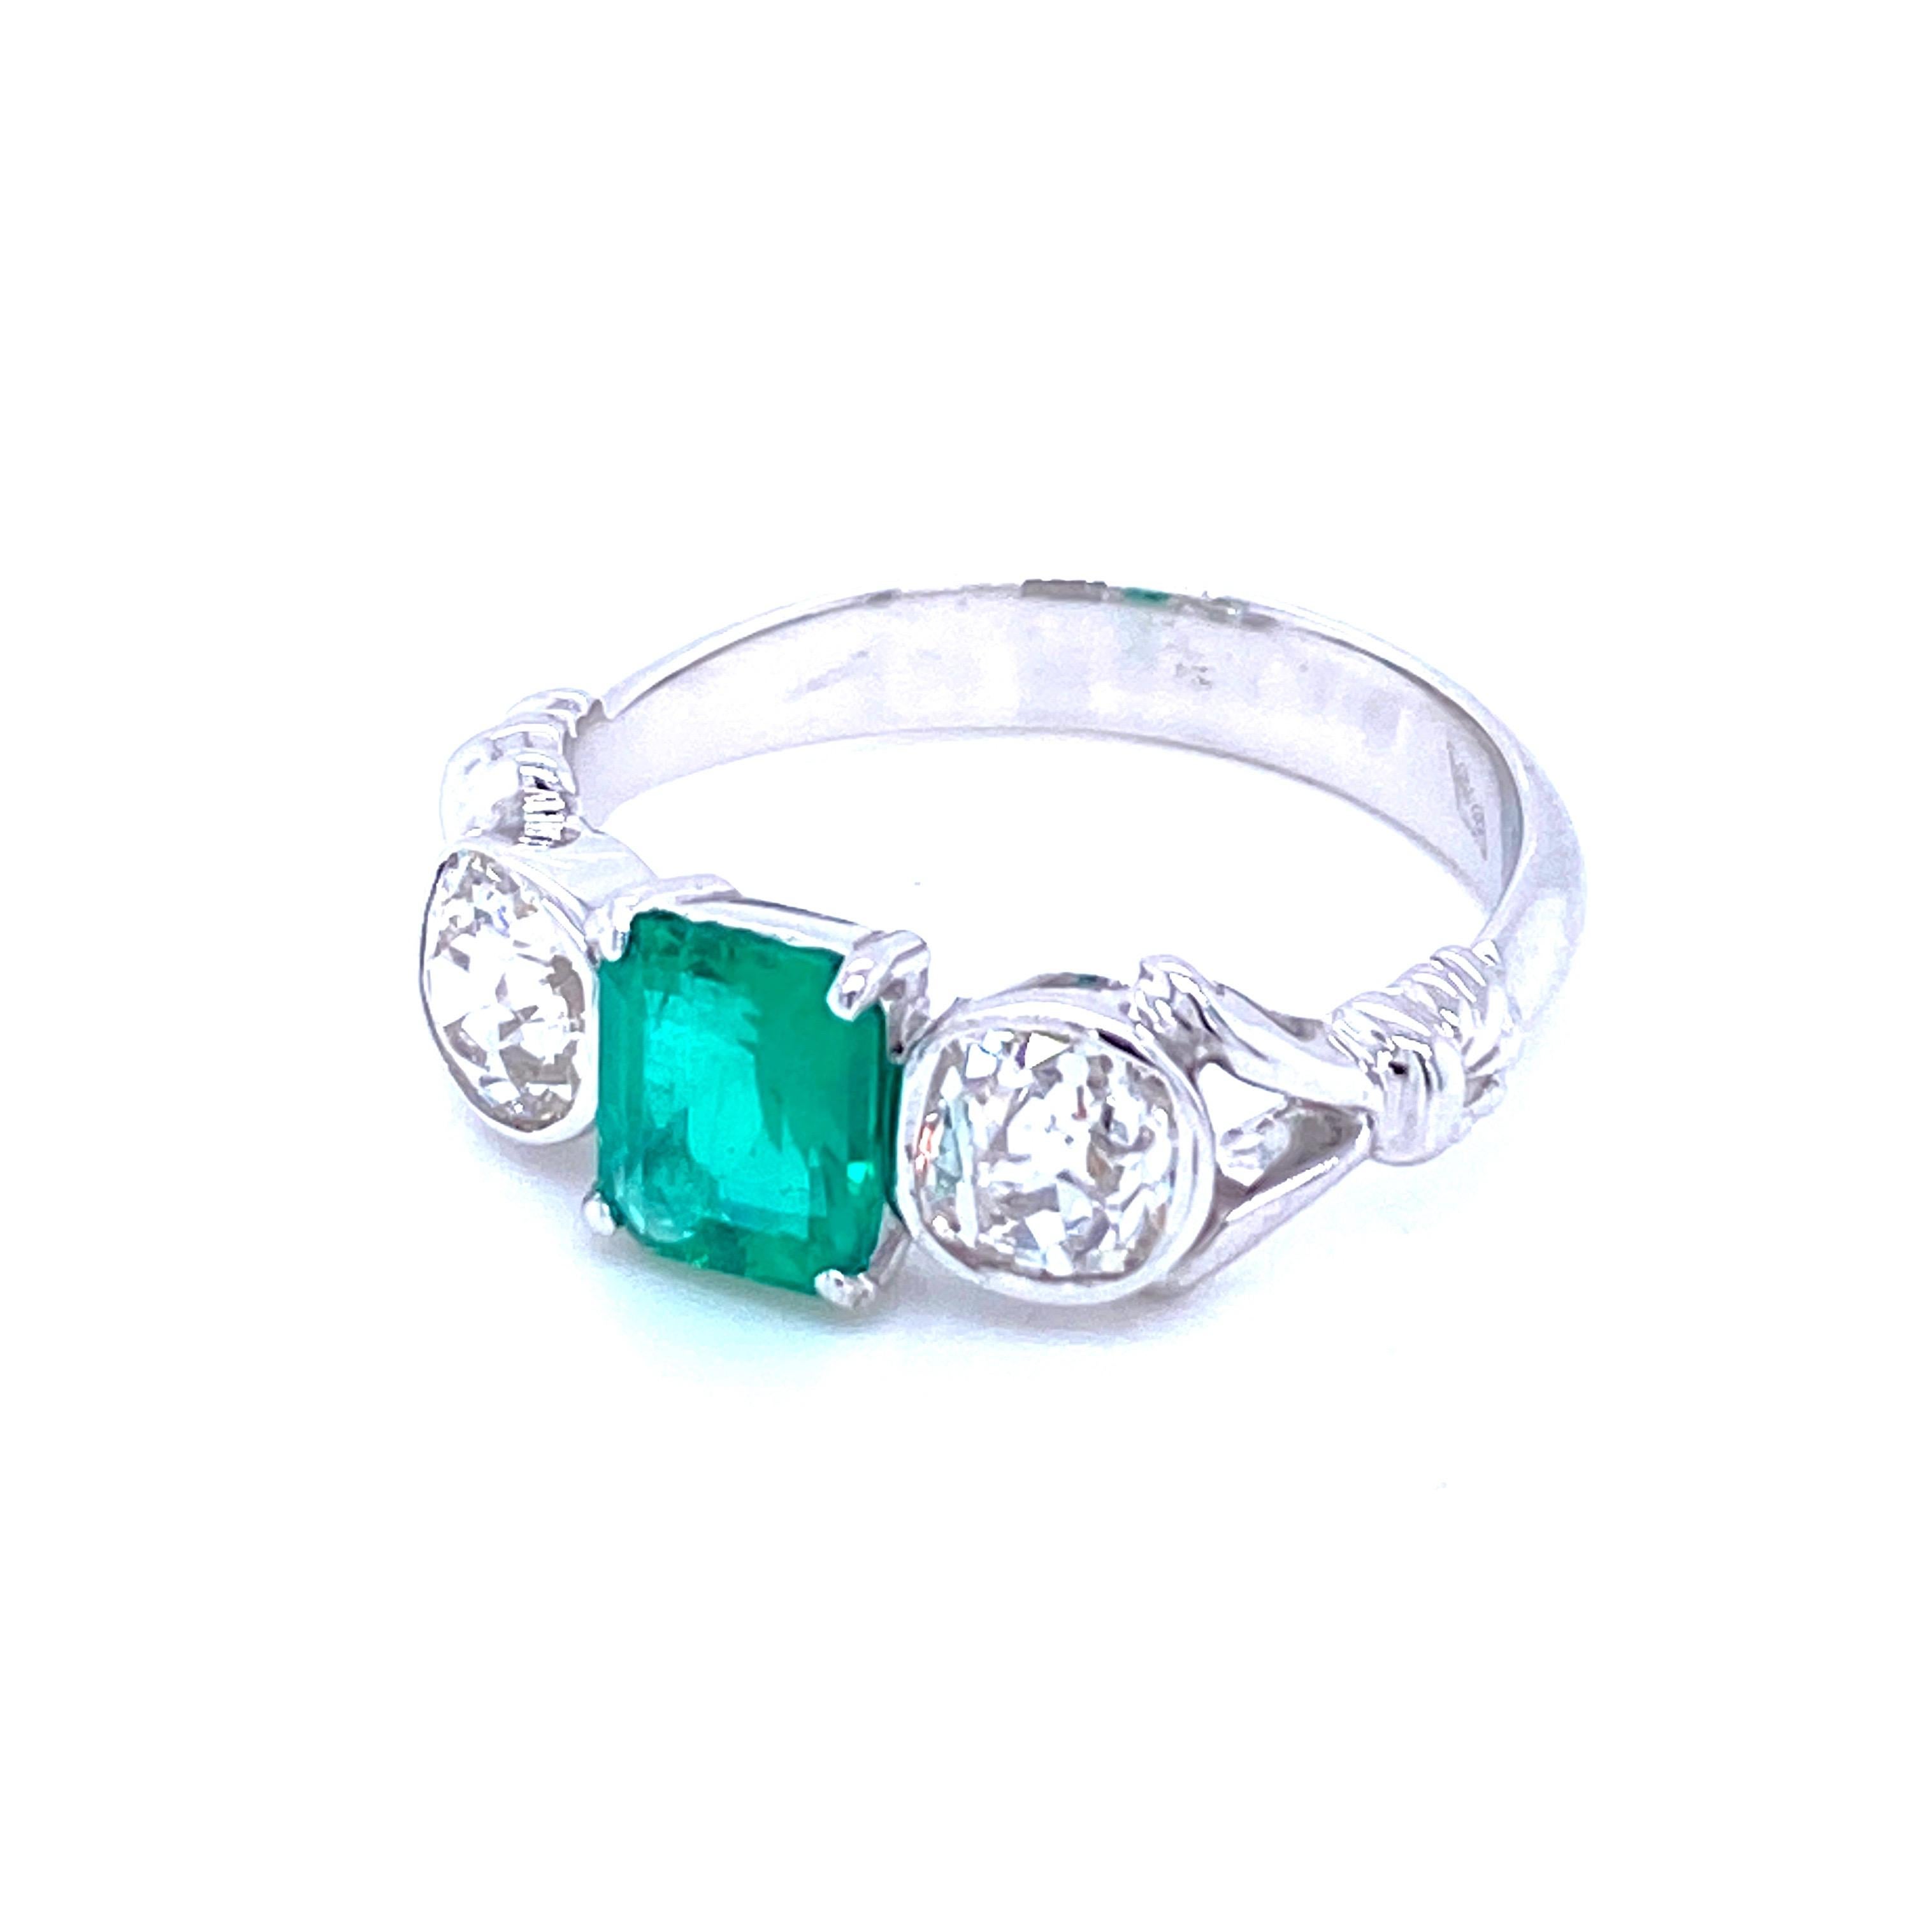 Classic three stone 18k Gold ring set with an Emerald cut  Colombian Emerald, free of any Oil/resin treatment, weighing 0.80 carats and 2 old cut diamonds with a total weight of approx. 0.80 carats I color Vs clarity. 

CONDITION: Pre-Owned -